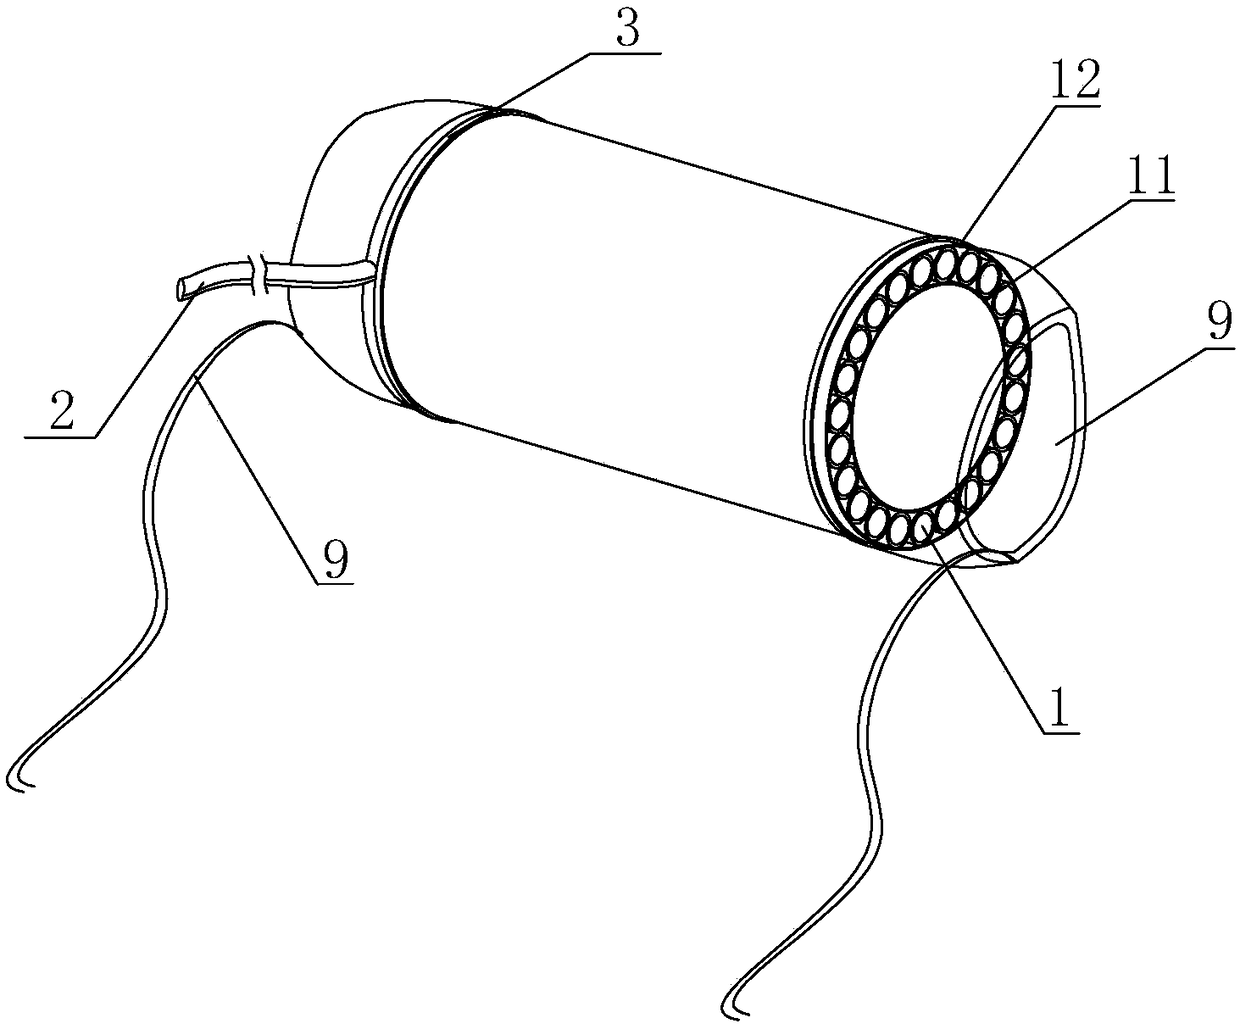 Air-filled channel apparatus for removing tumor specimens from anus after colorectal surgery